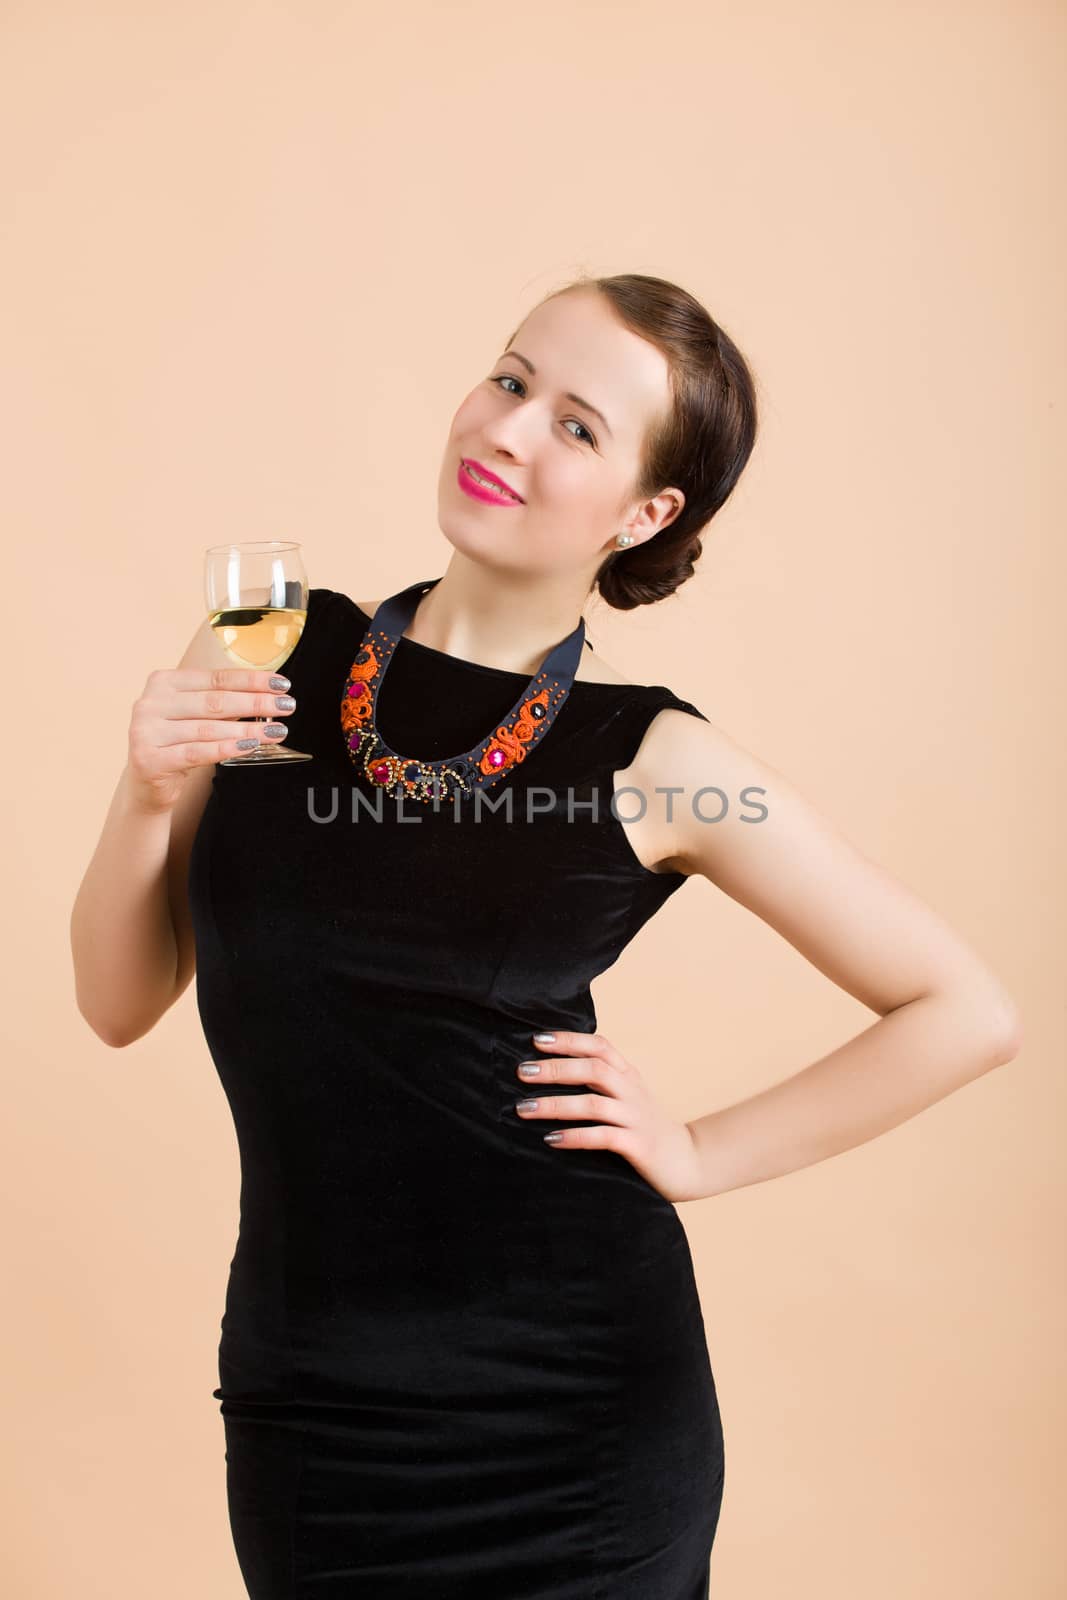 Studio portrait of smiling beautiful young brunette woman holding a glass of white wine